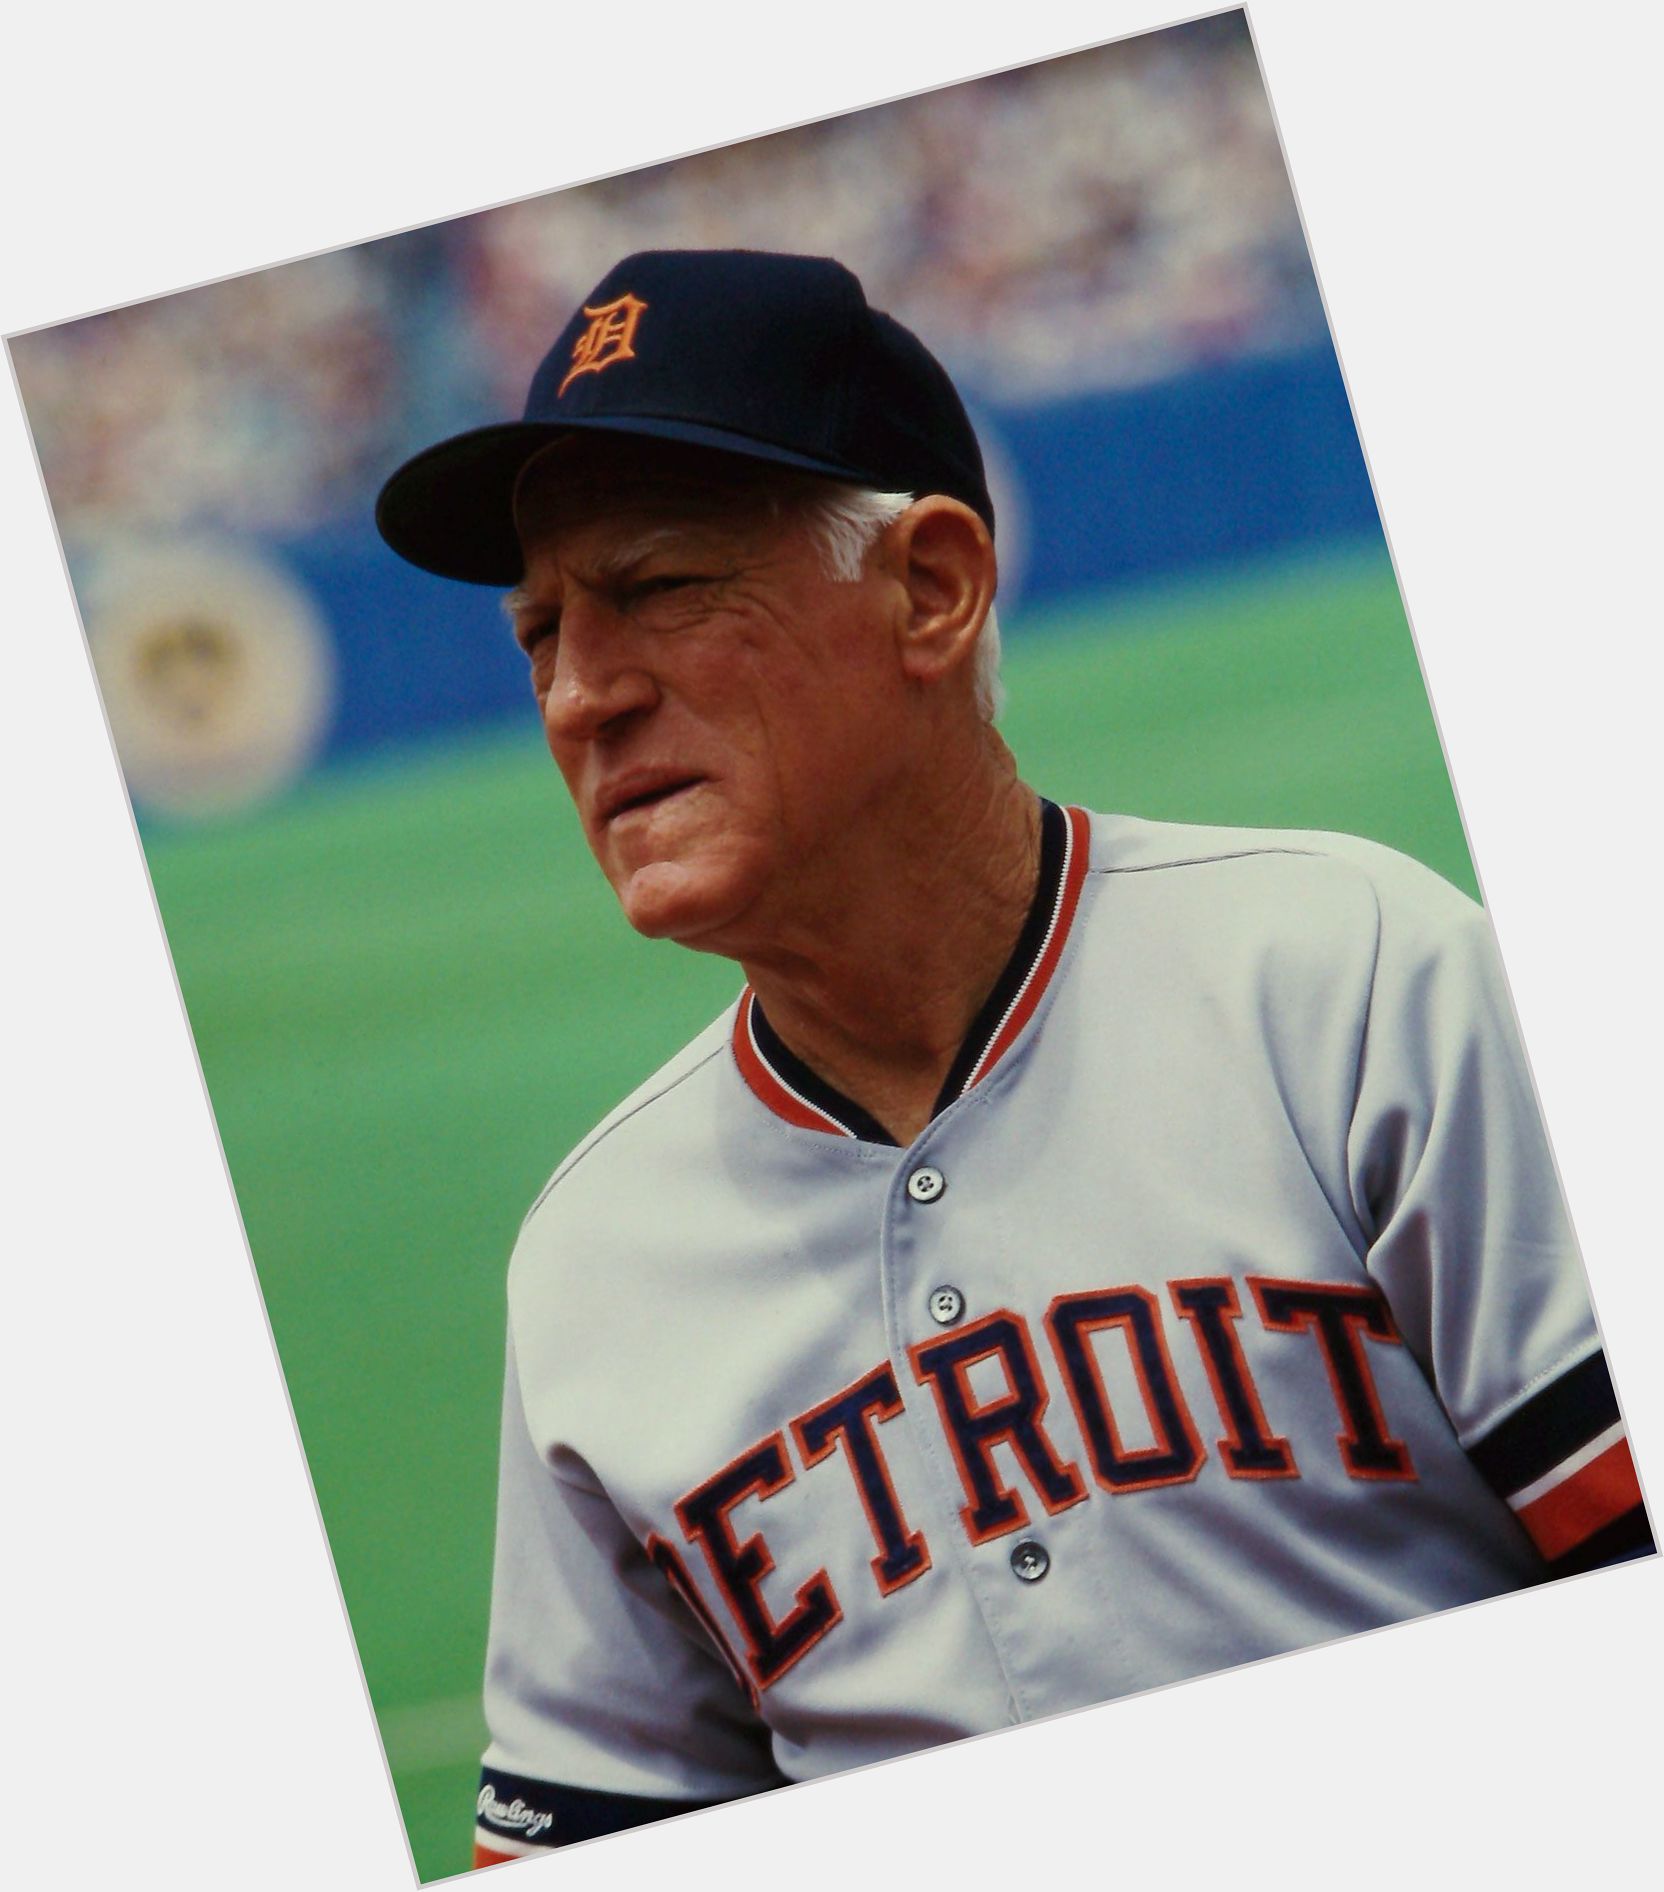 Https://fanpagepress.net/m/S/Sparky Anderson New Pic 1